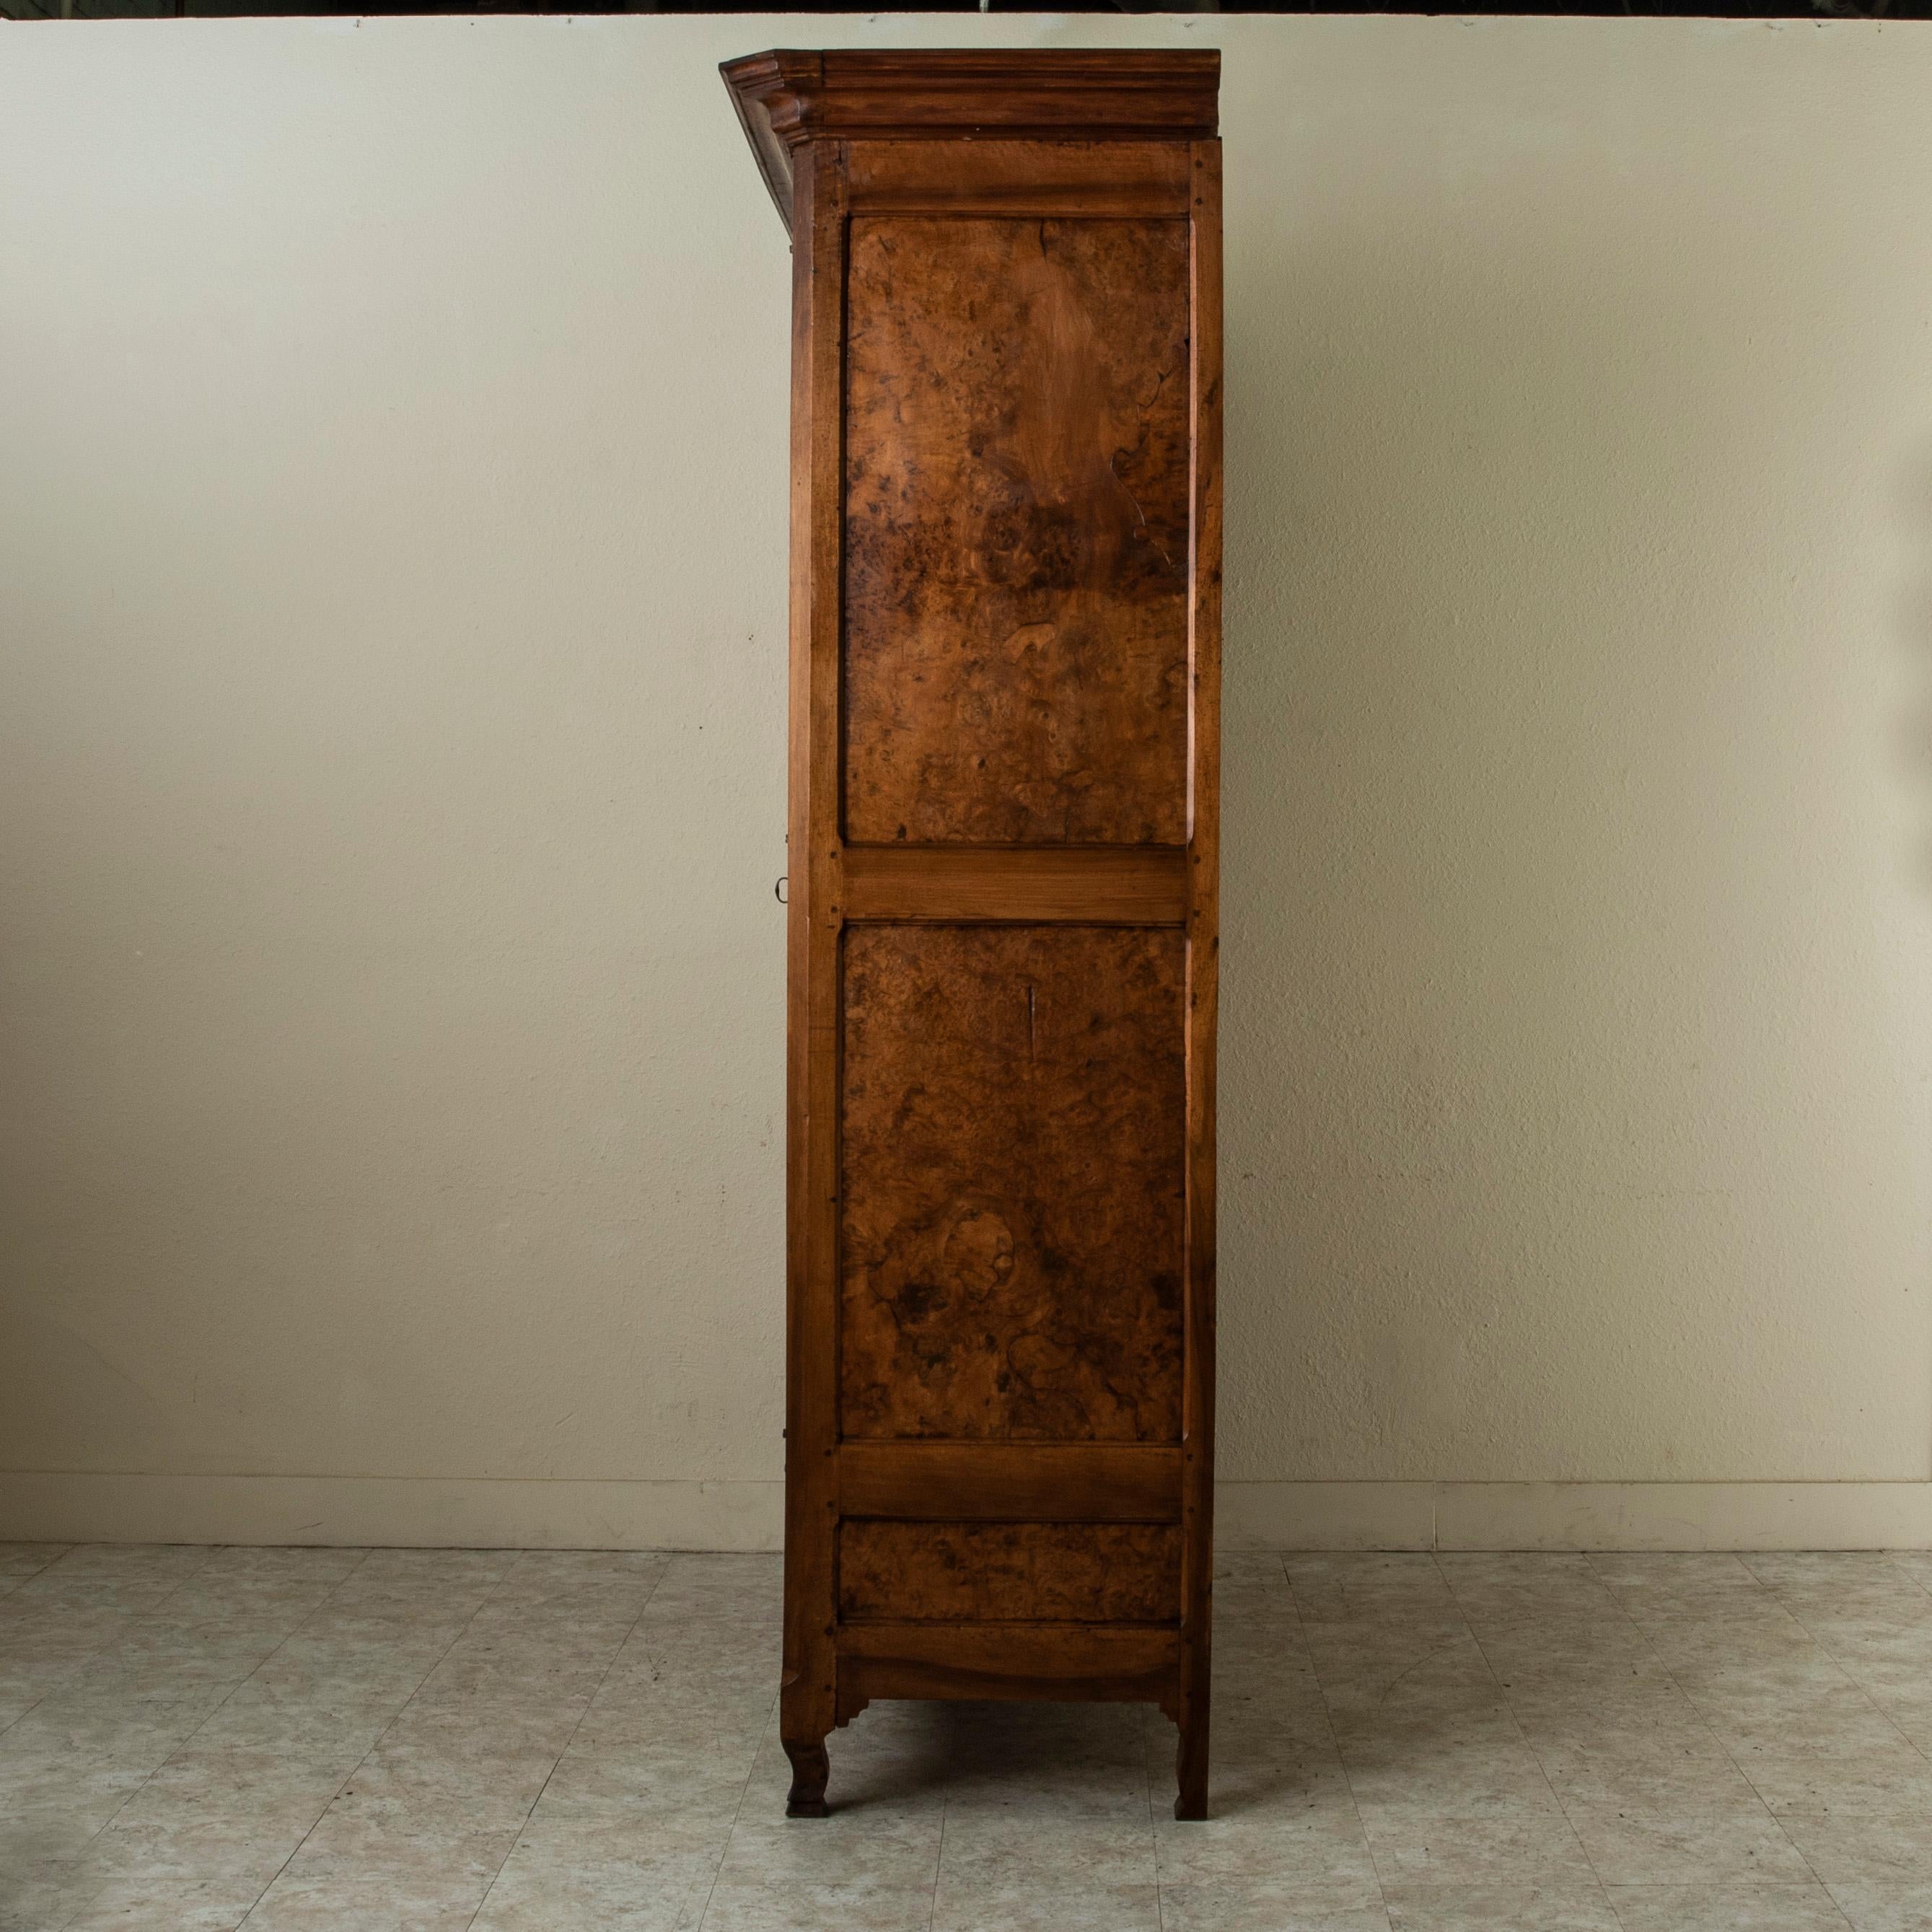 Louis XVI Large Early 19th Century French Burl Elm Armoire or Wardrobe, Hand Forged Locks